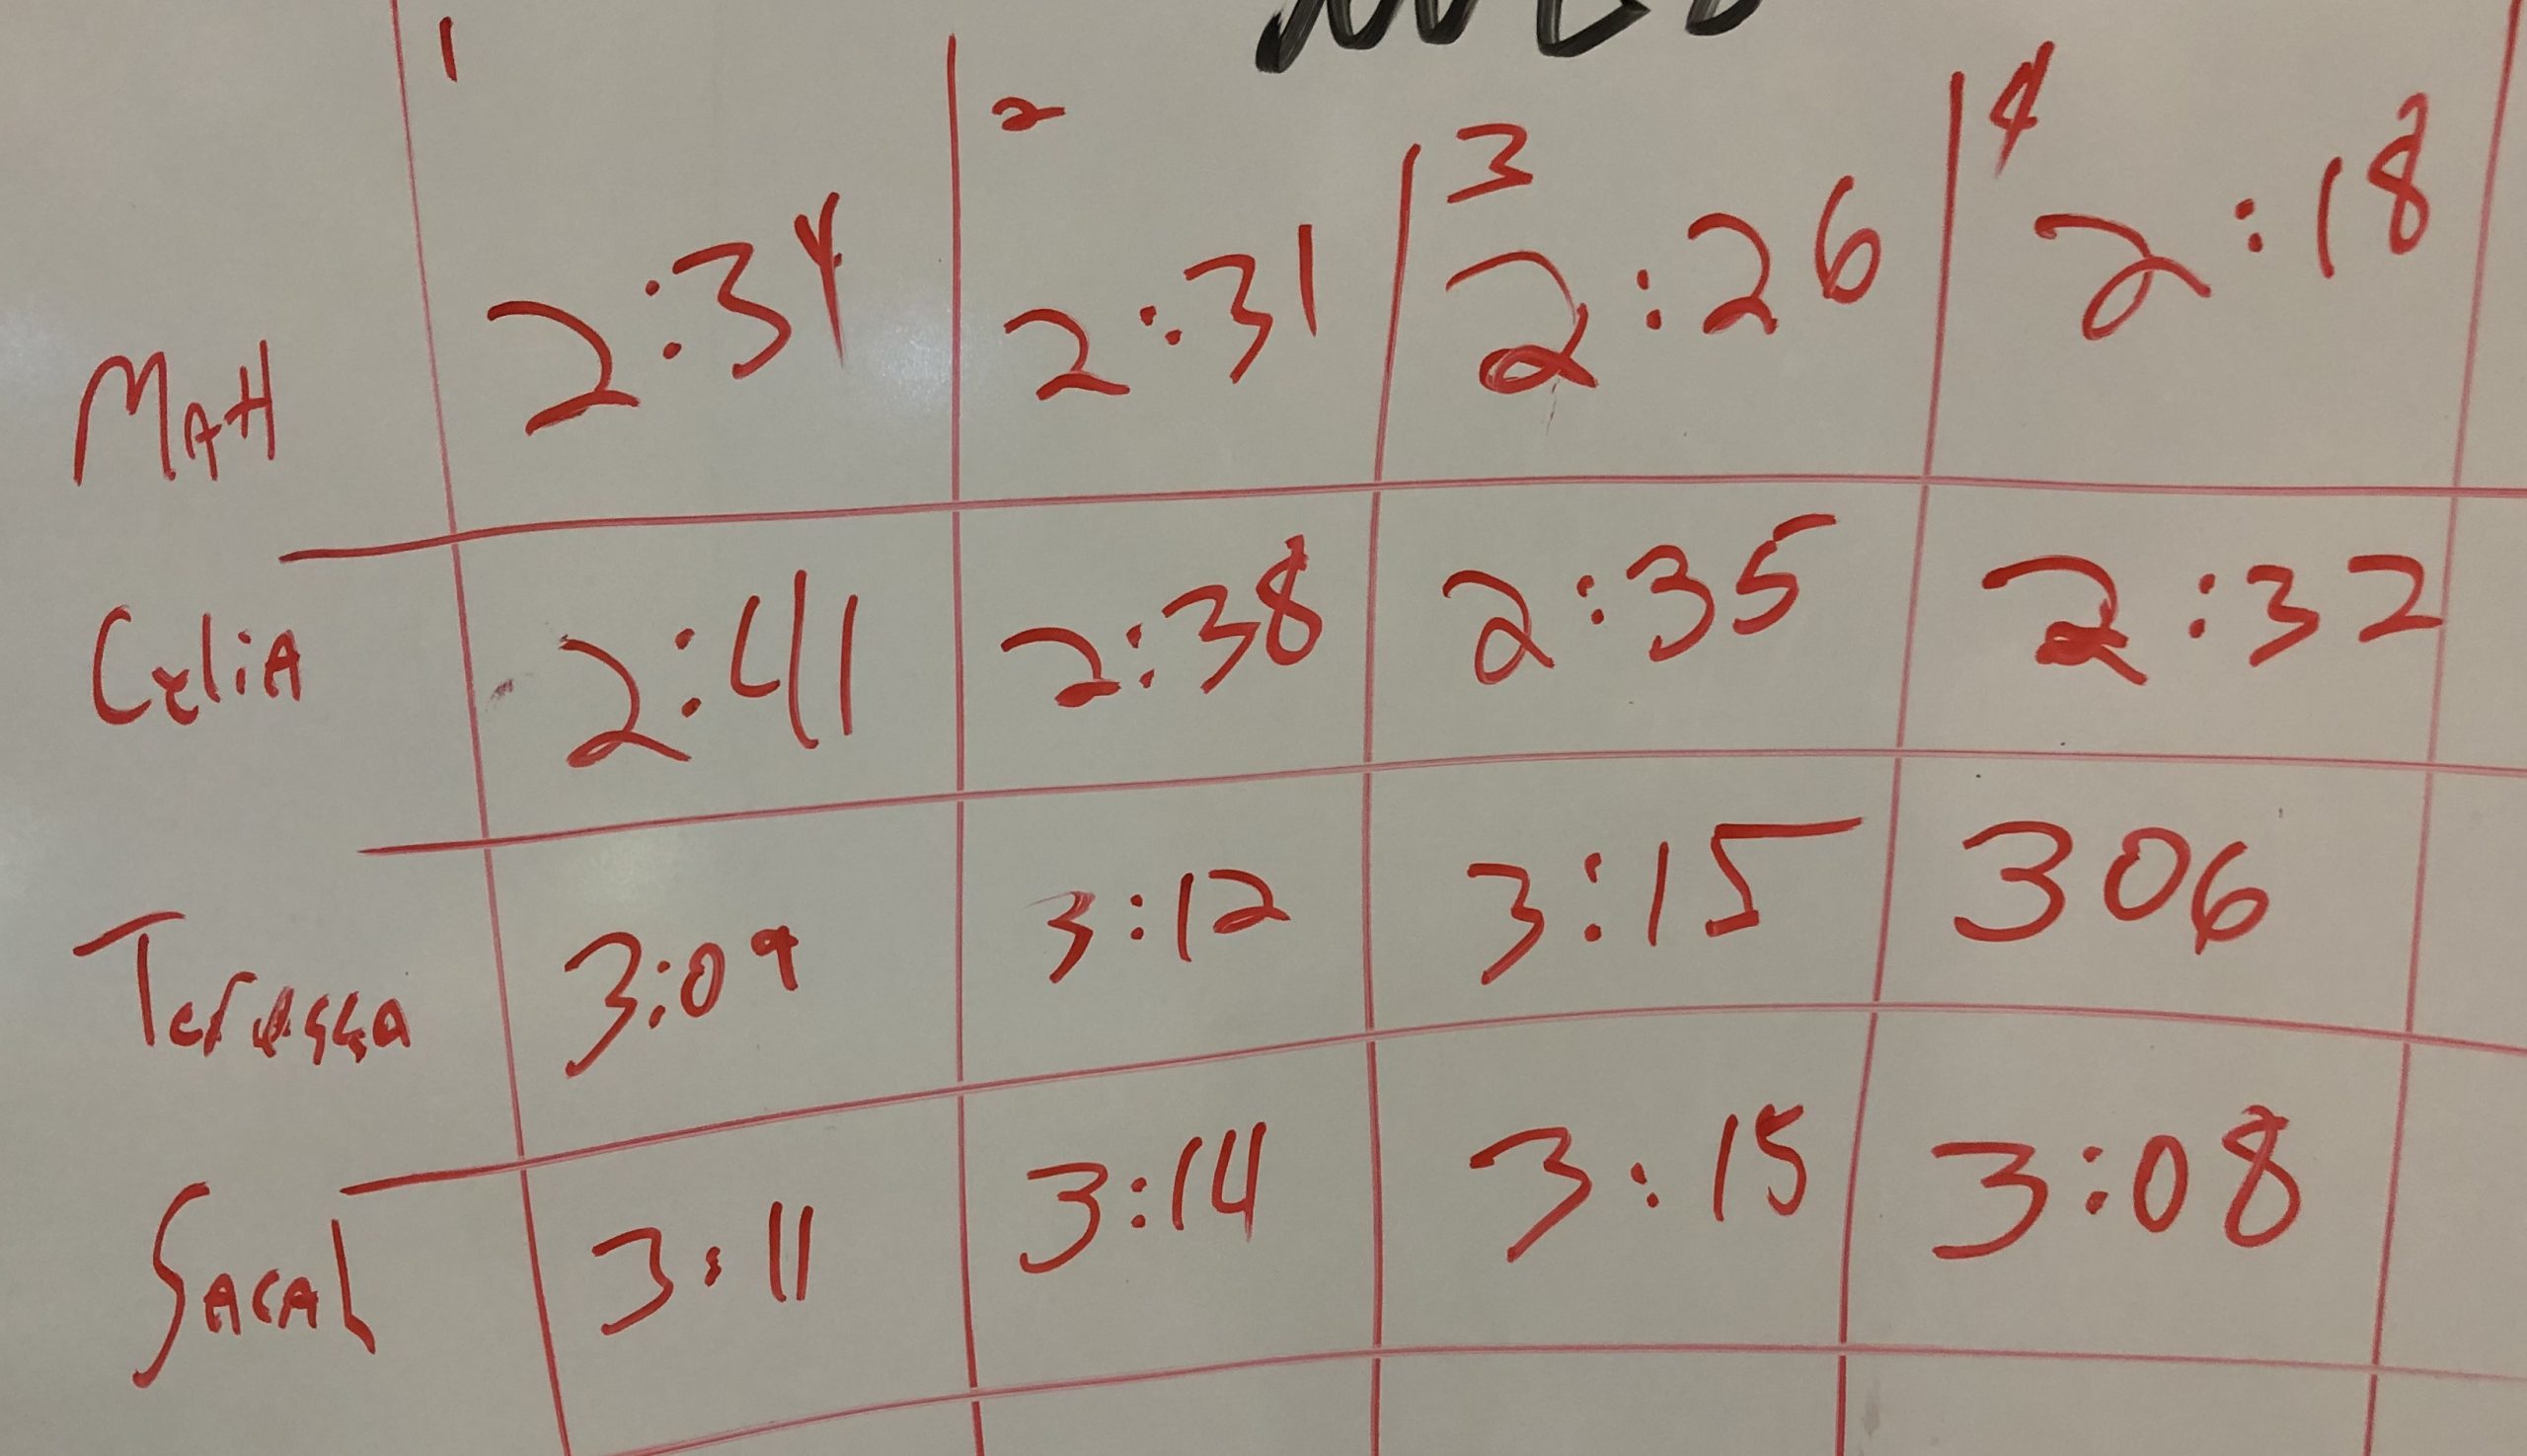 Times on whiteboard